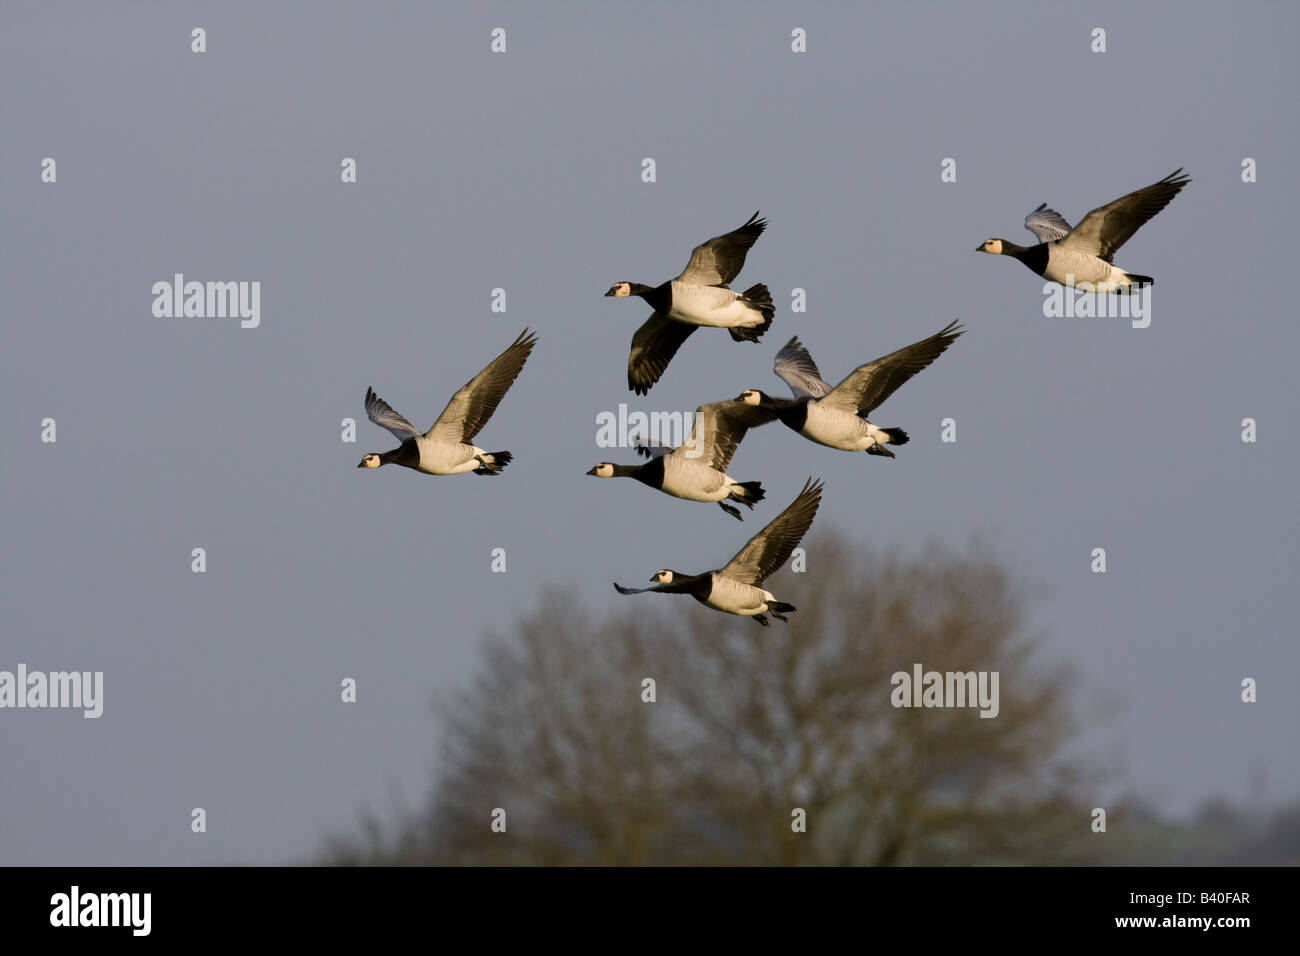 Group of Barnacle geese Branta leucopsis in flight together Stock Photo